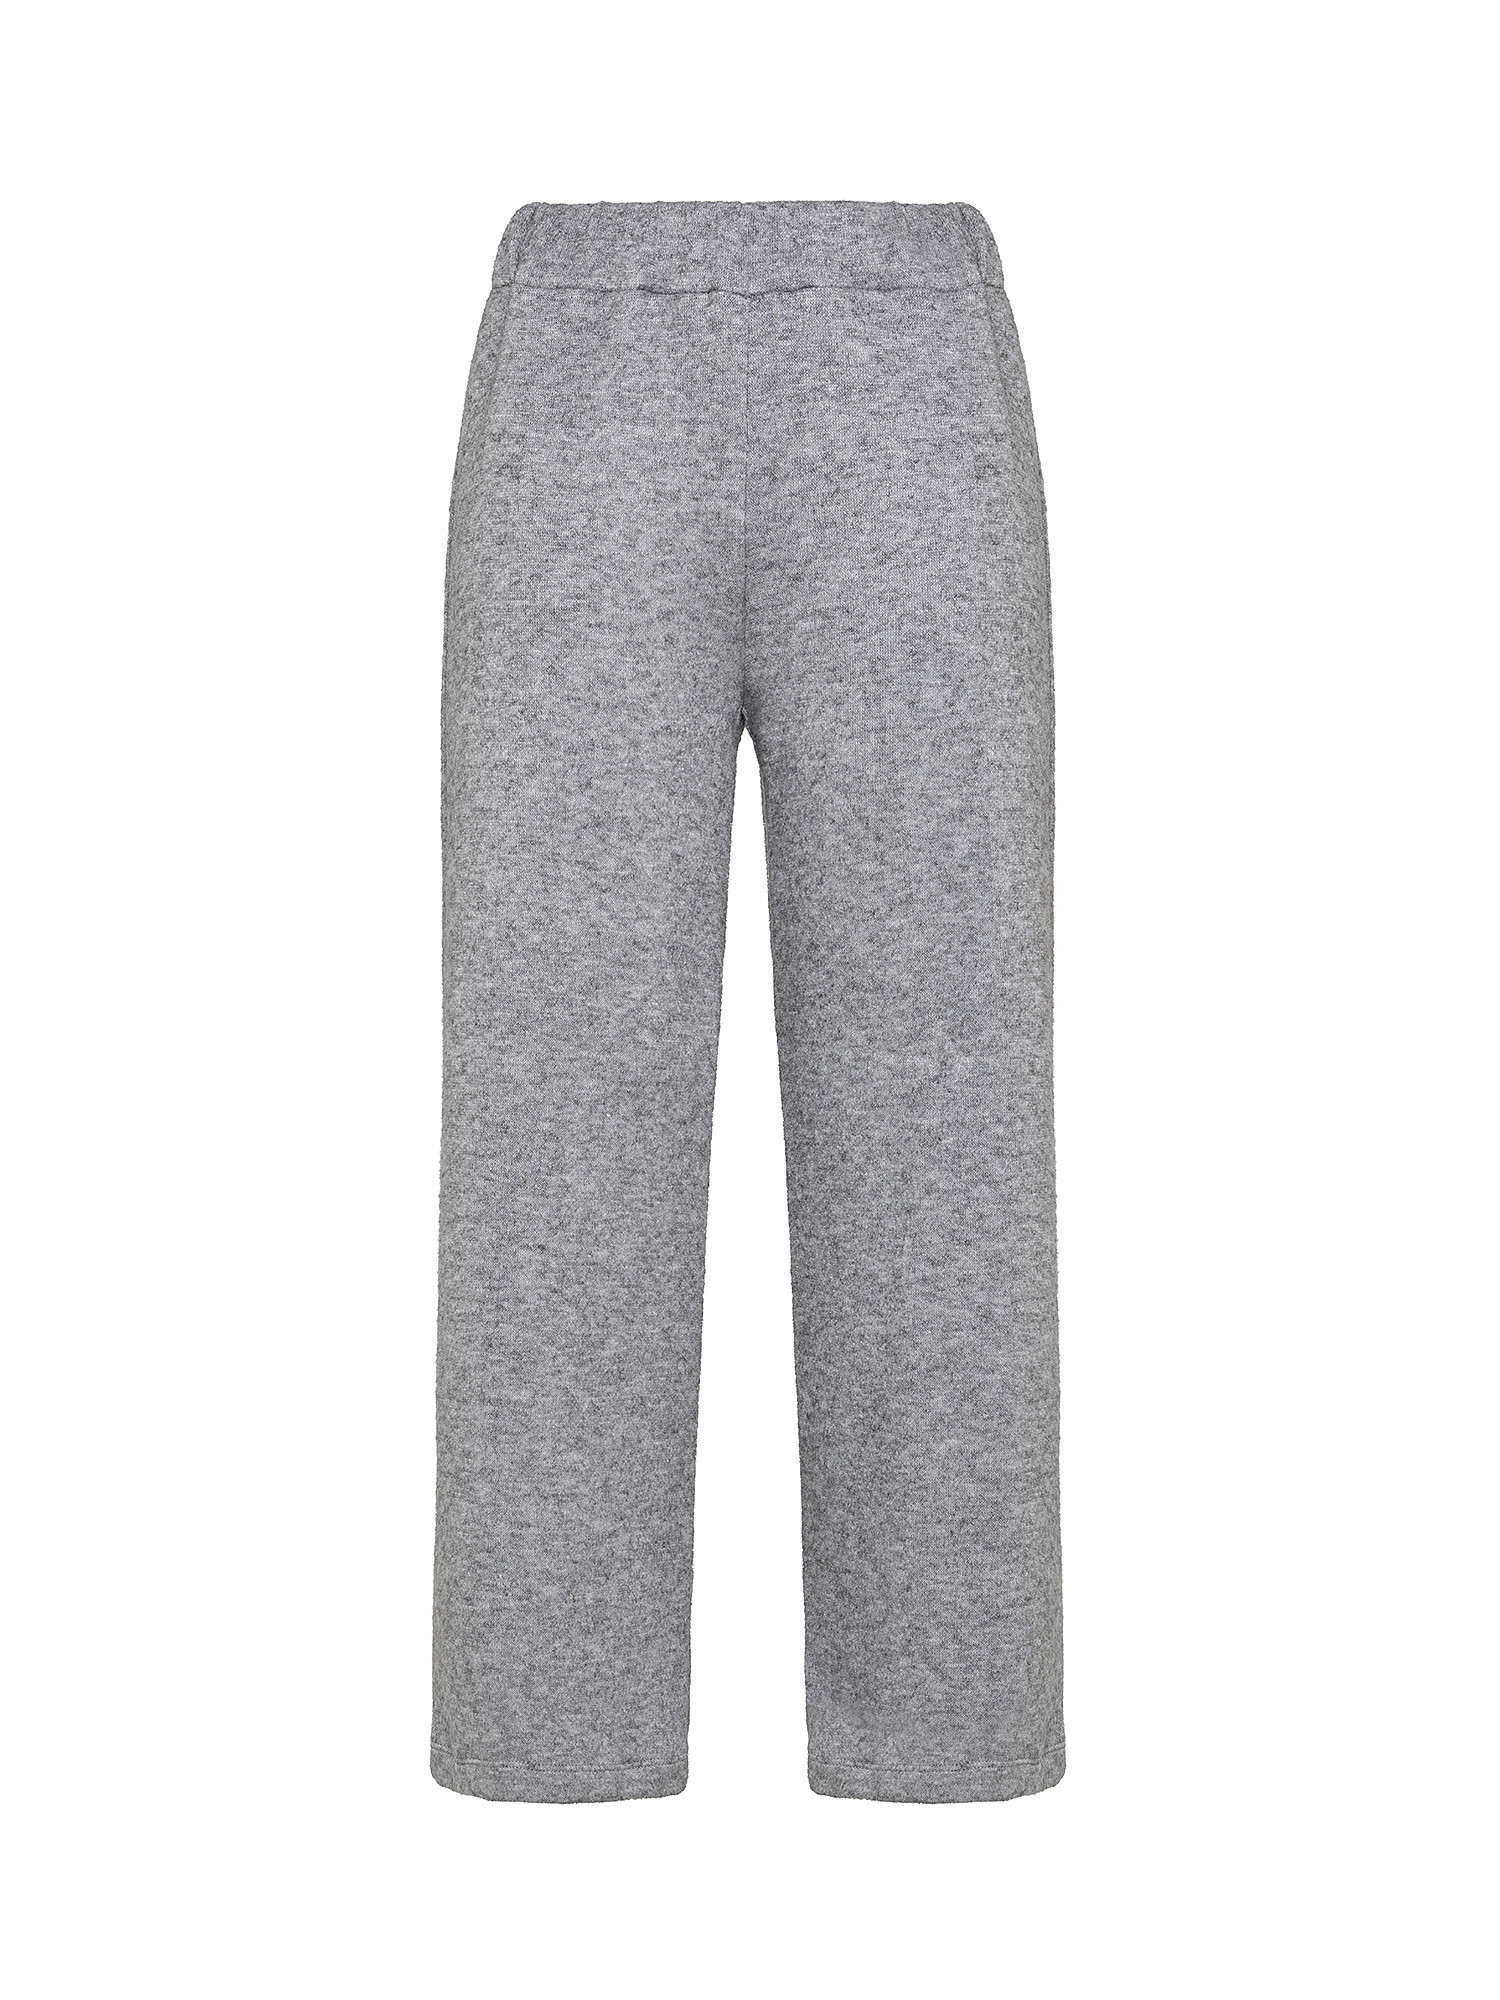 Jersey trousers with elasticated waist, Light Grey Melange, large image number 0